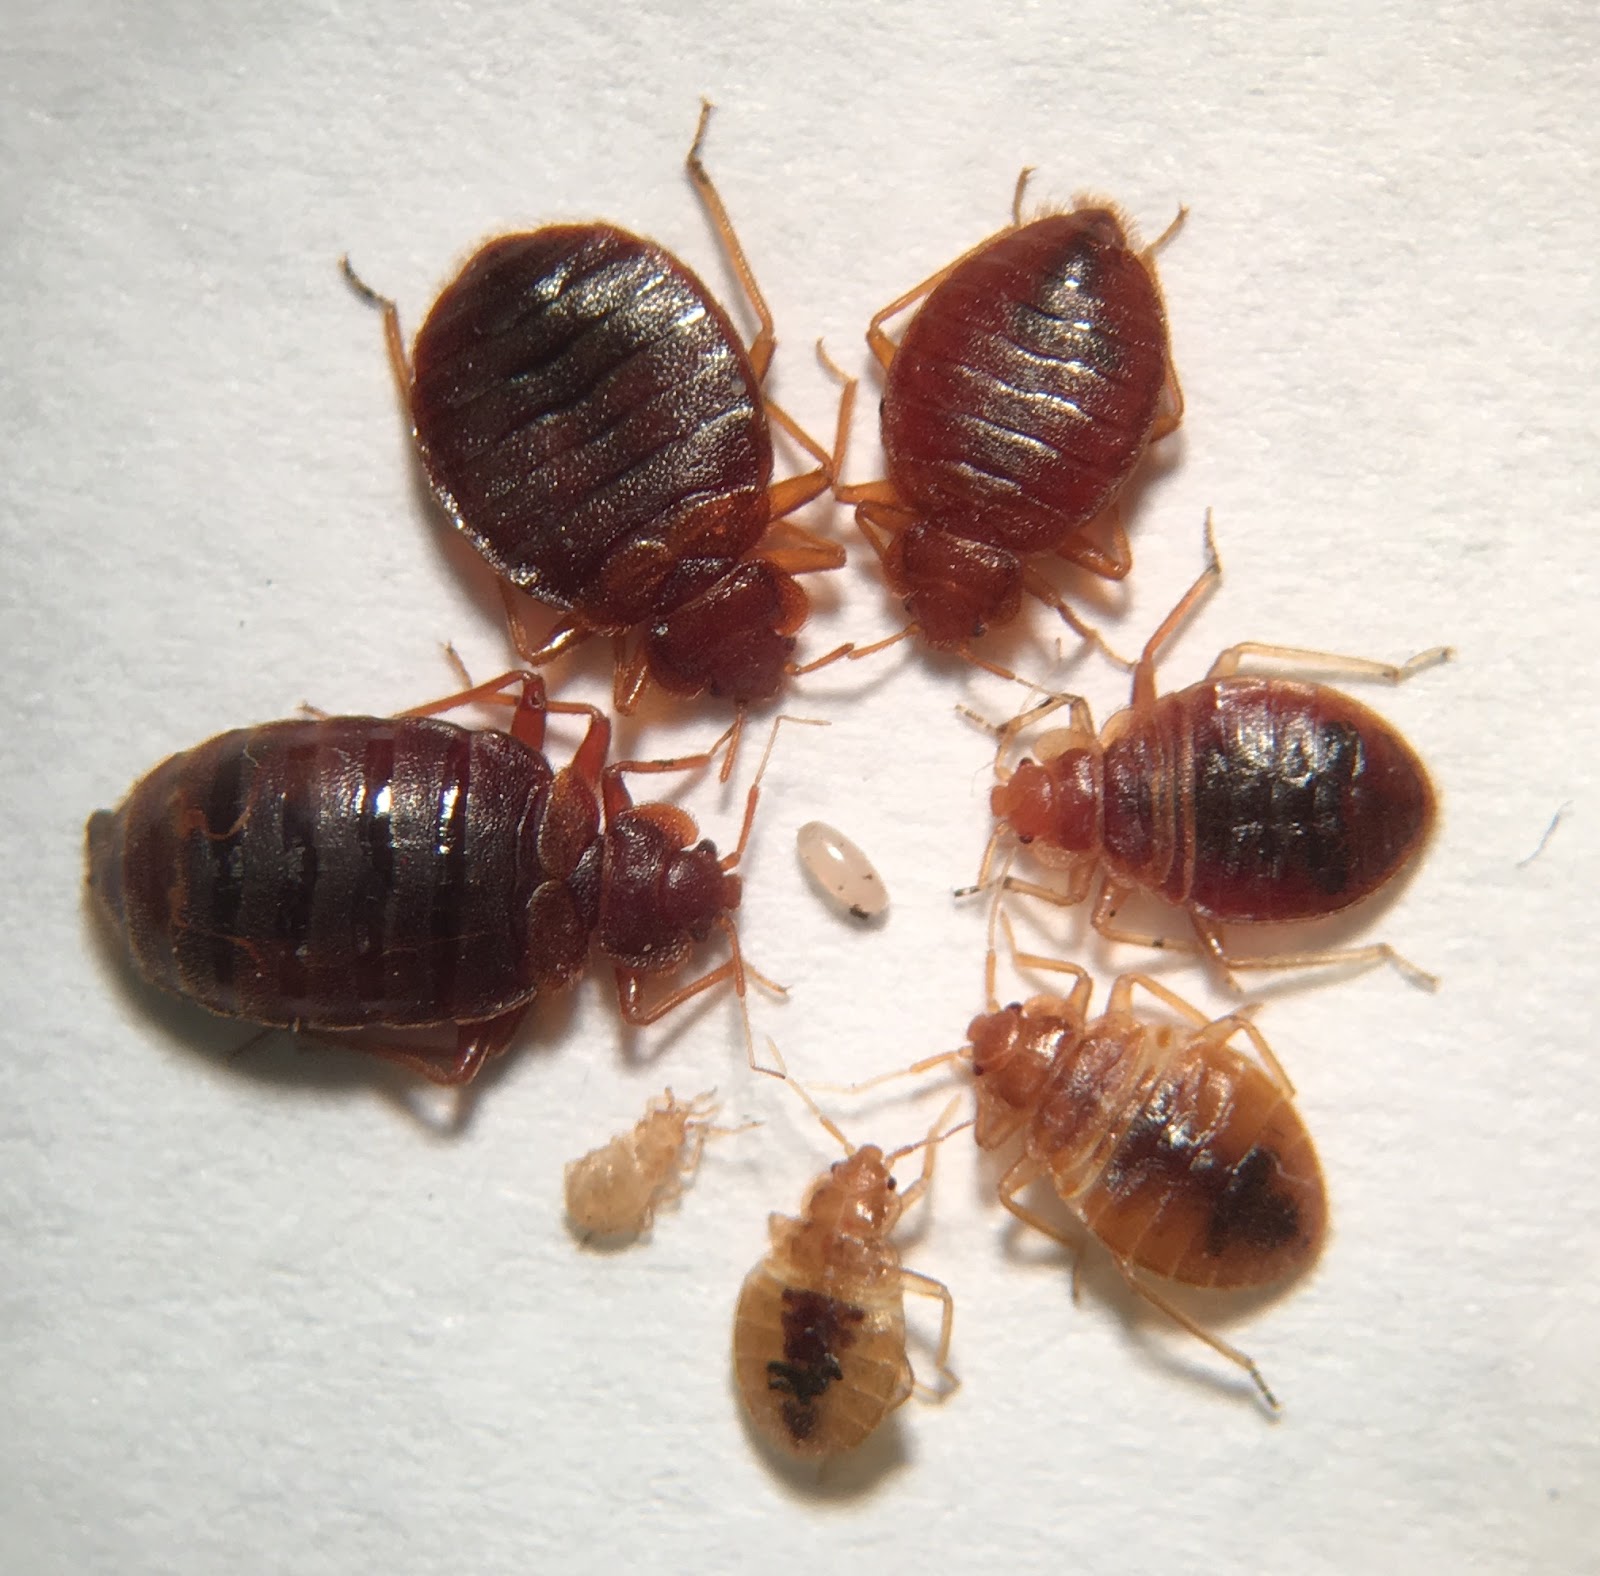 Ensuring green and safer methods to remove bed bugs